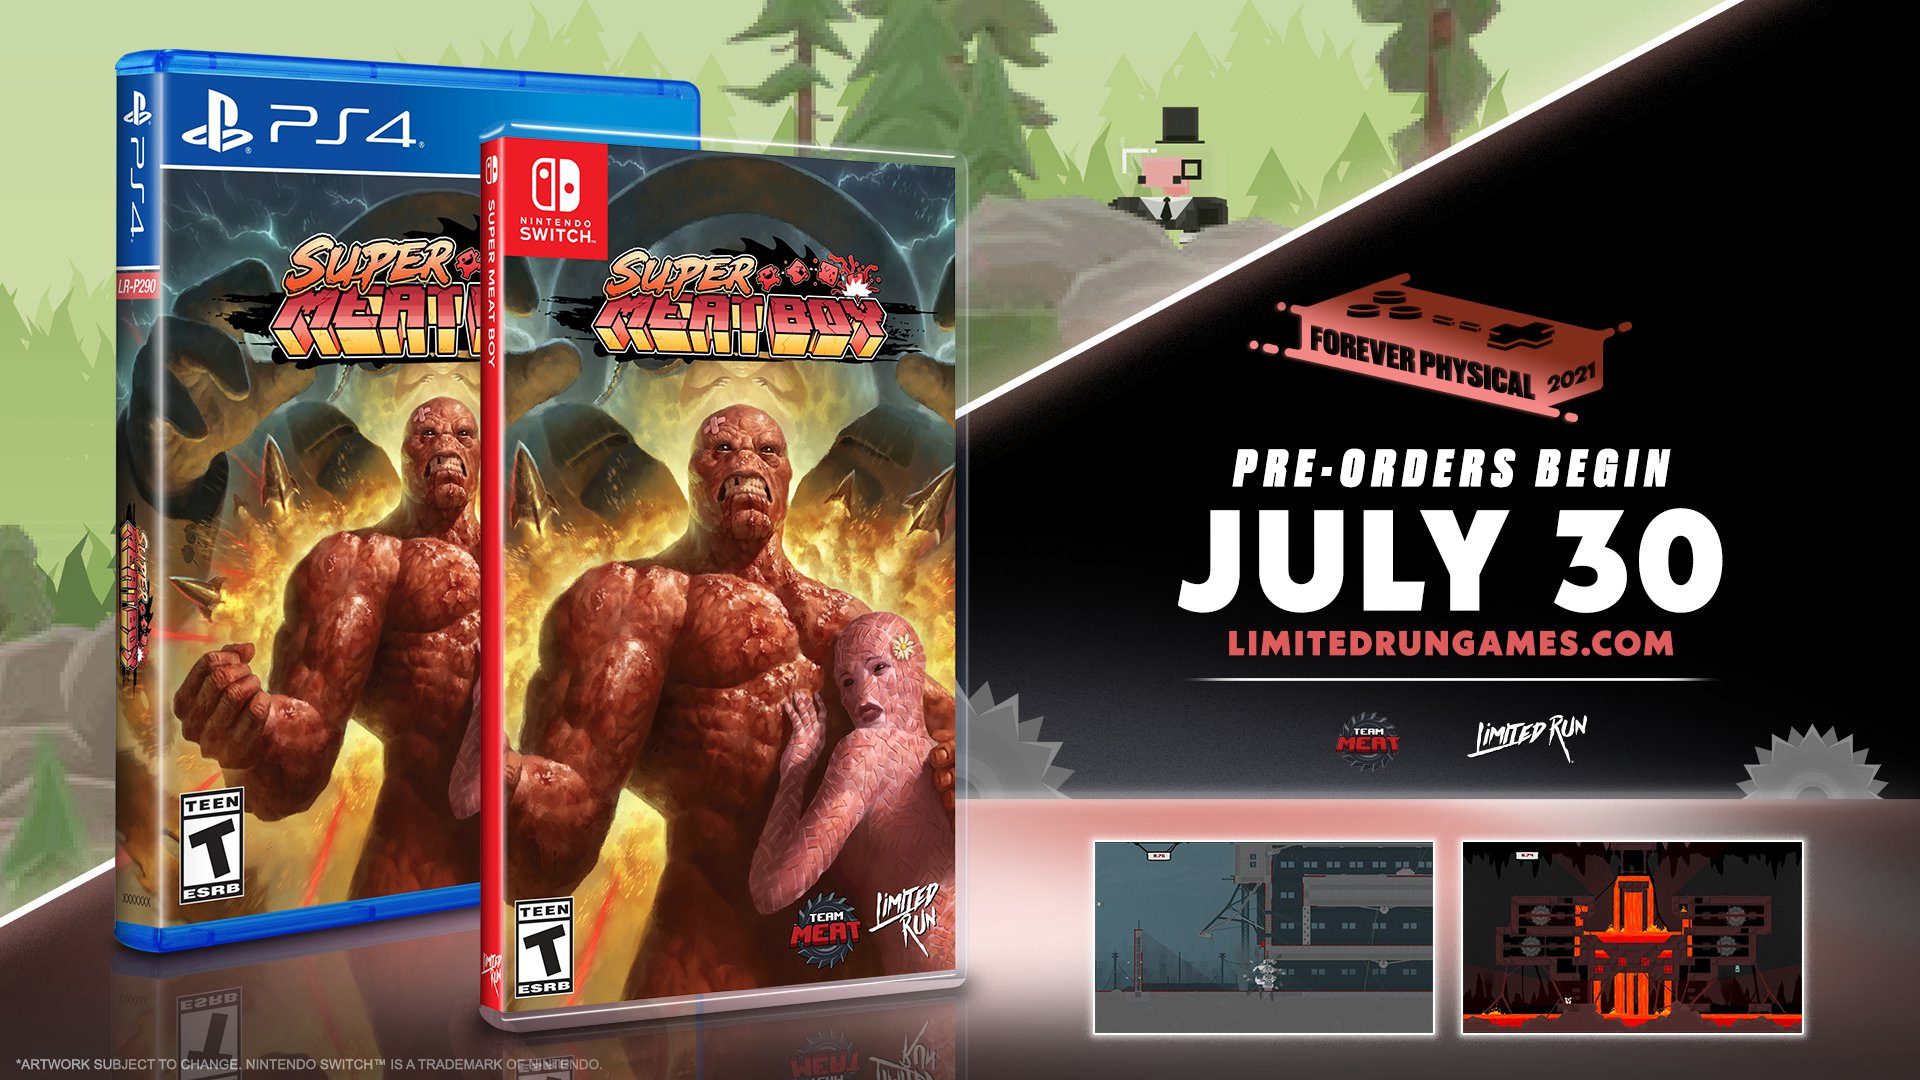 The fleshy, "realistic" box art for Super Meat Boy's Limited Run